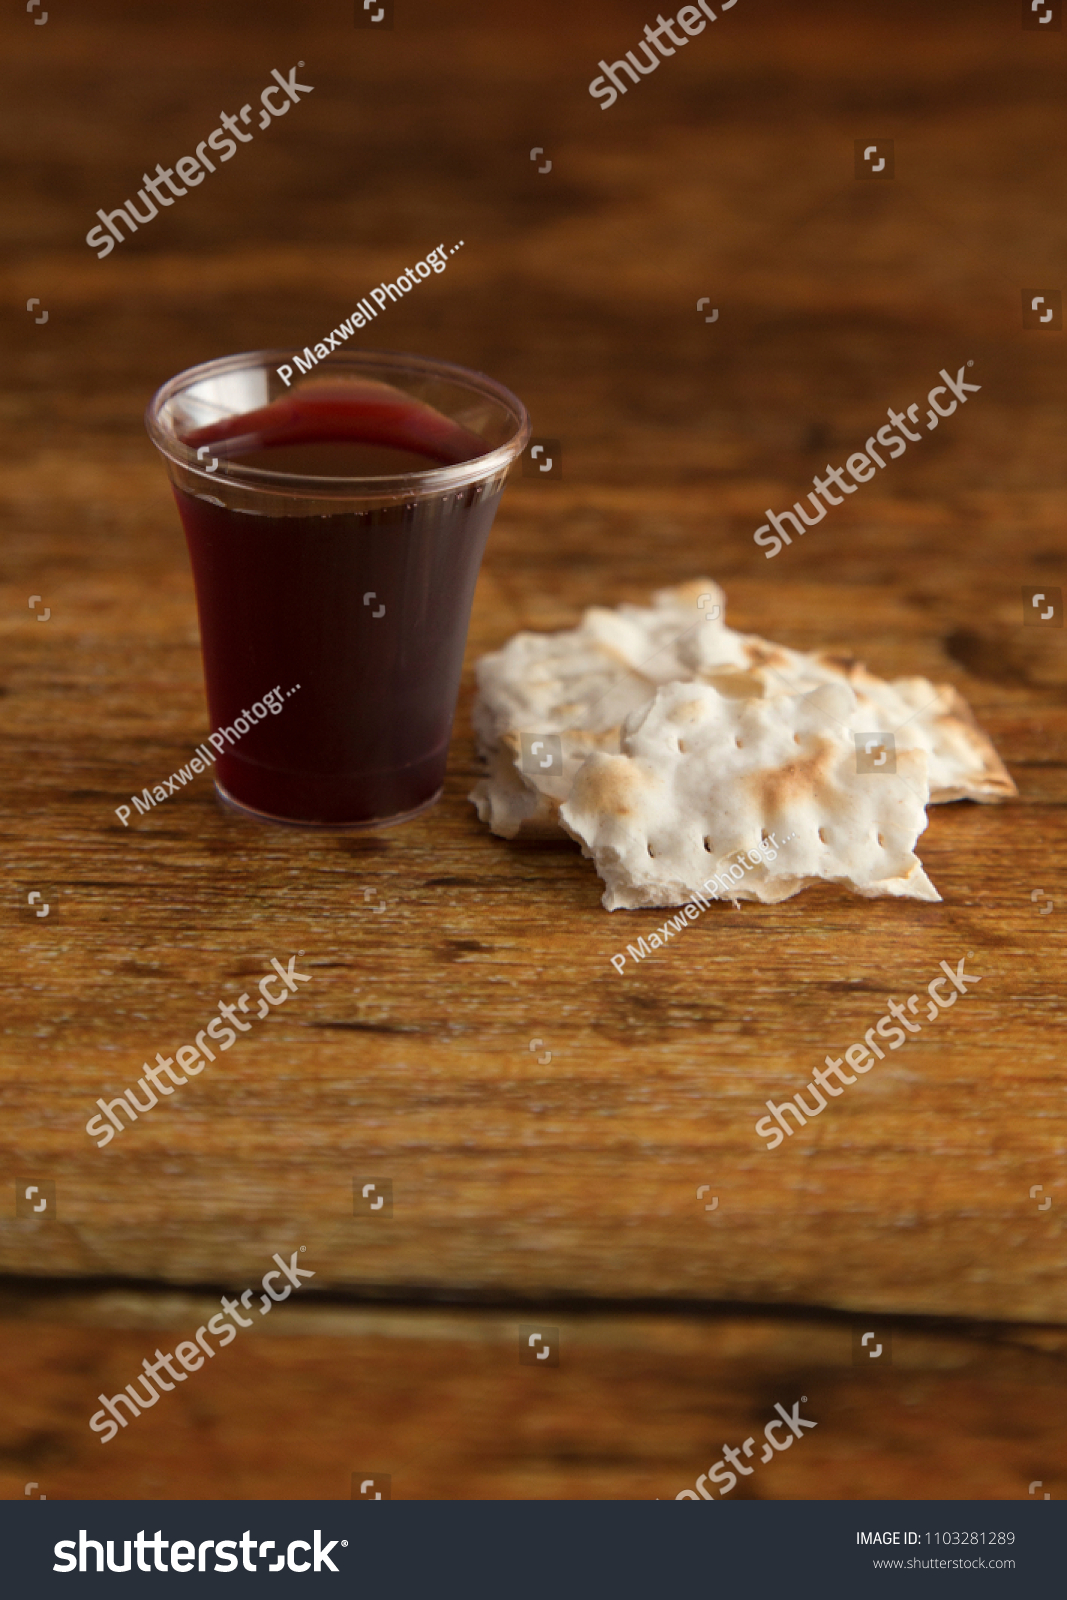 Christian Communion on a Wooden Table #1103281289